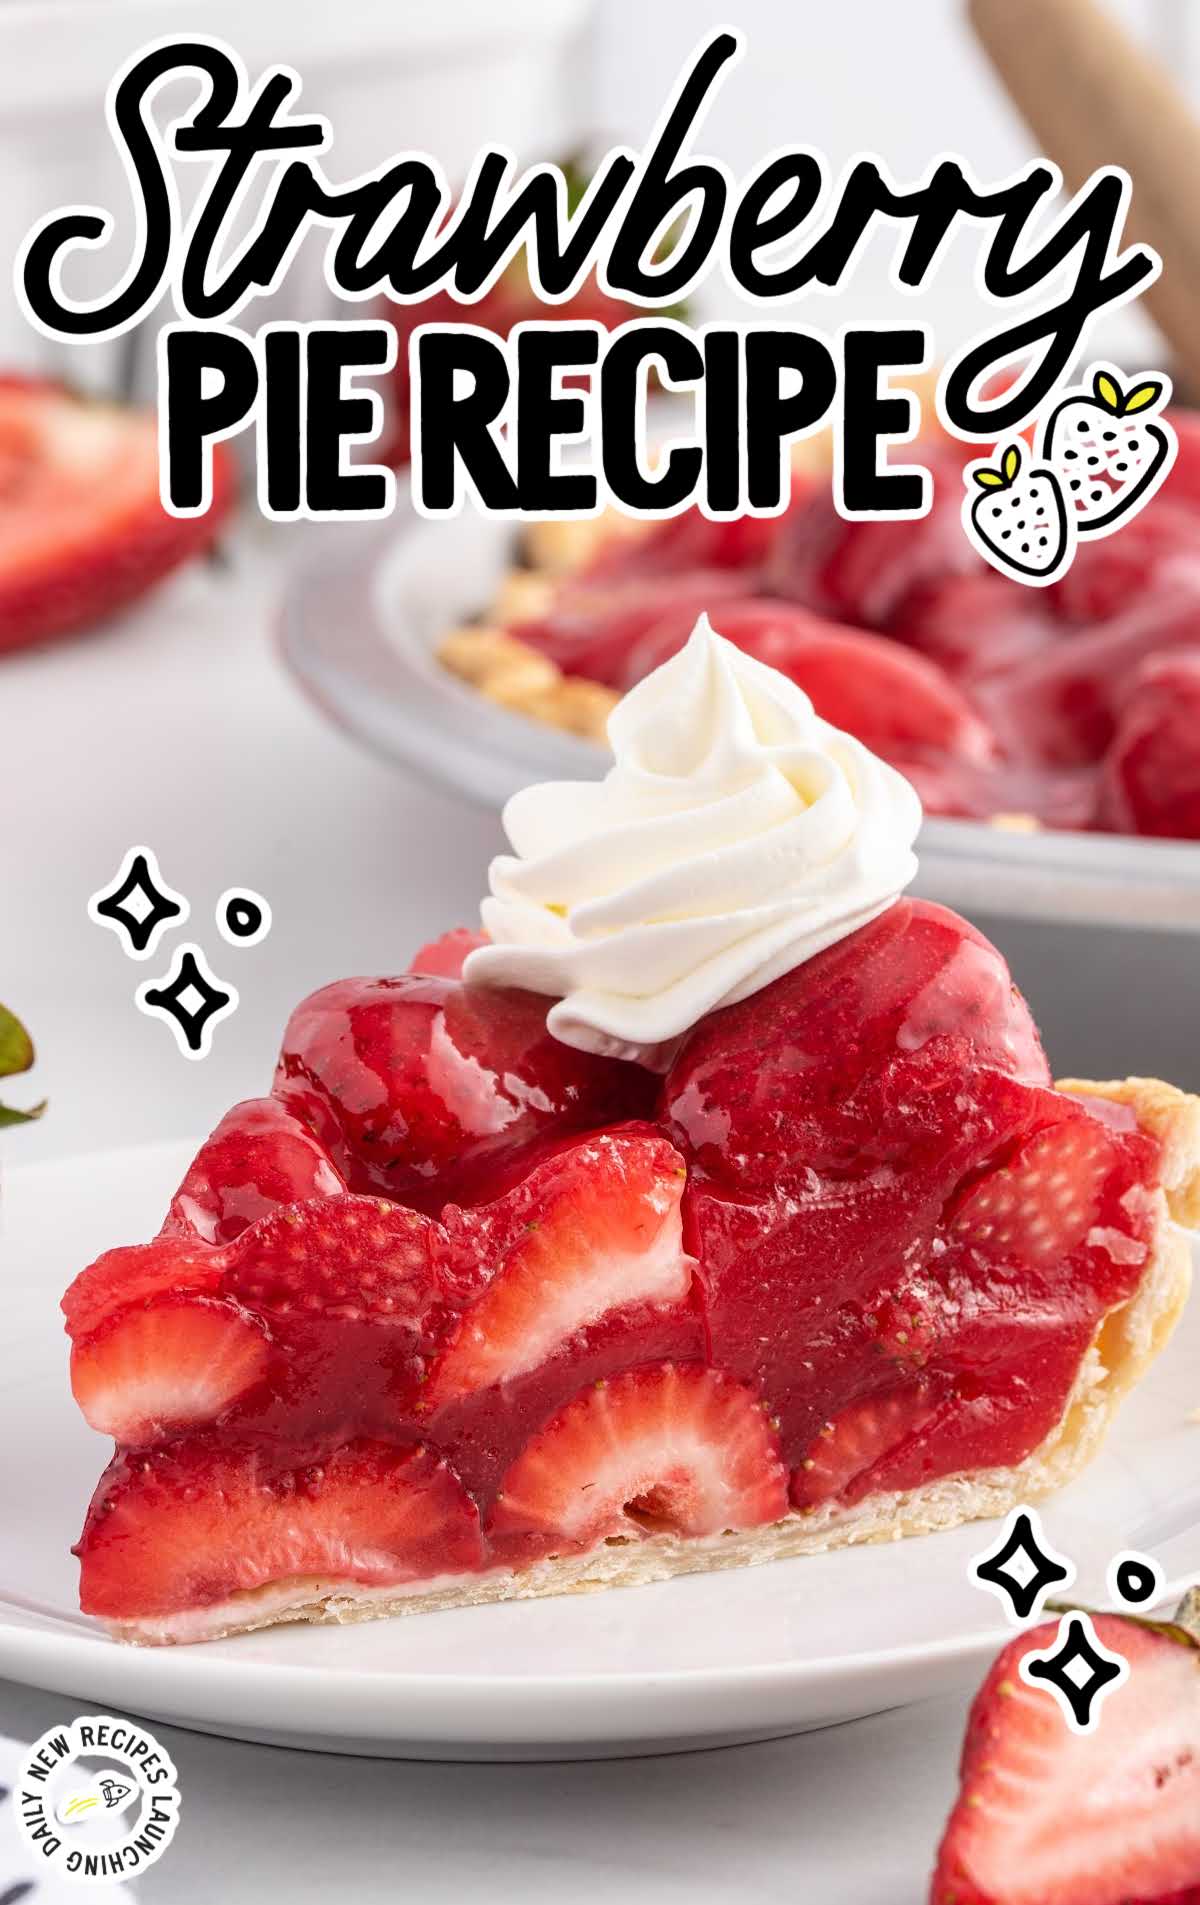 a close up shot of a slice of Strawberry Pie topped with whipped cream on a plate